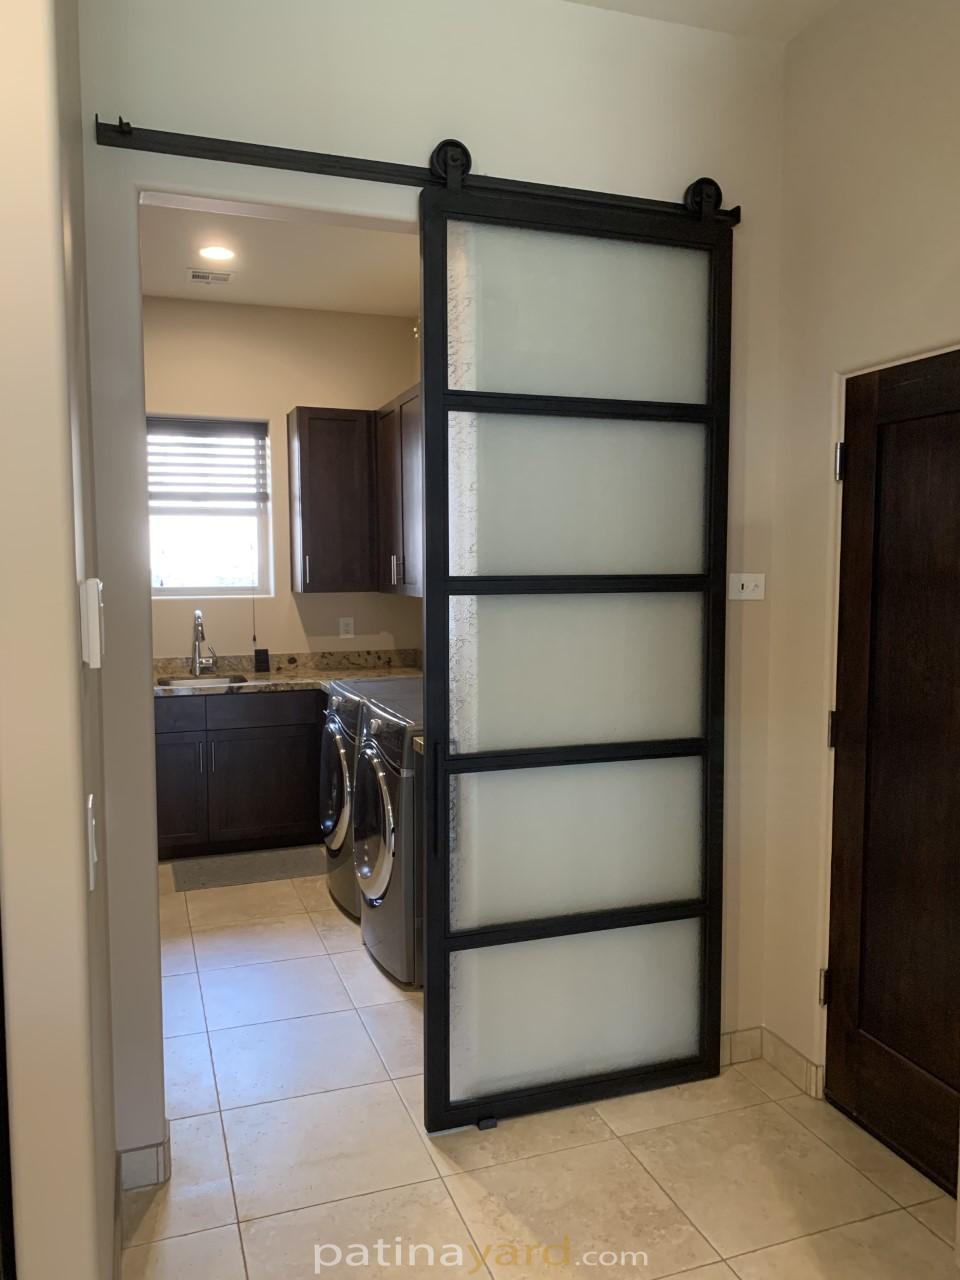 laundry room frosted glass and blacken metal barn door